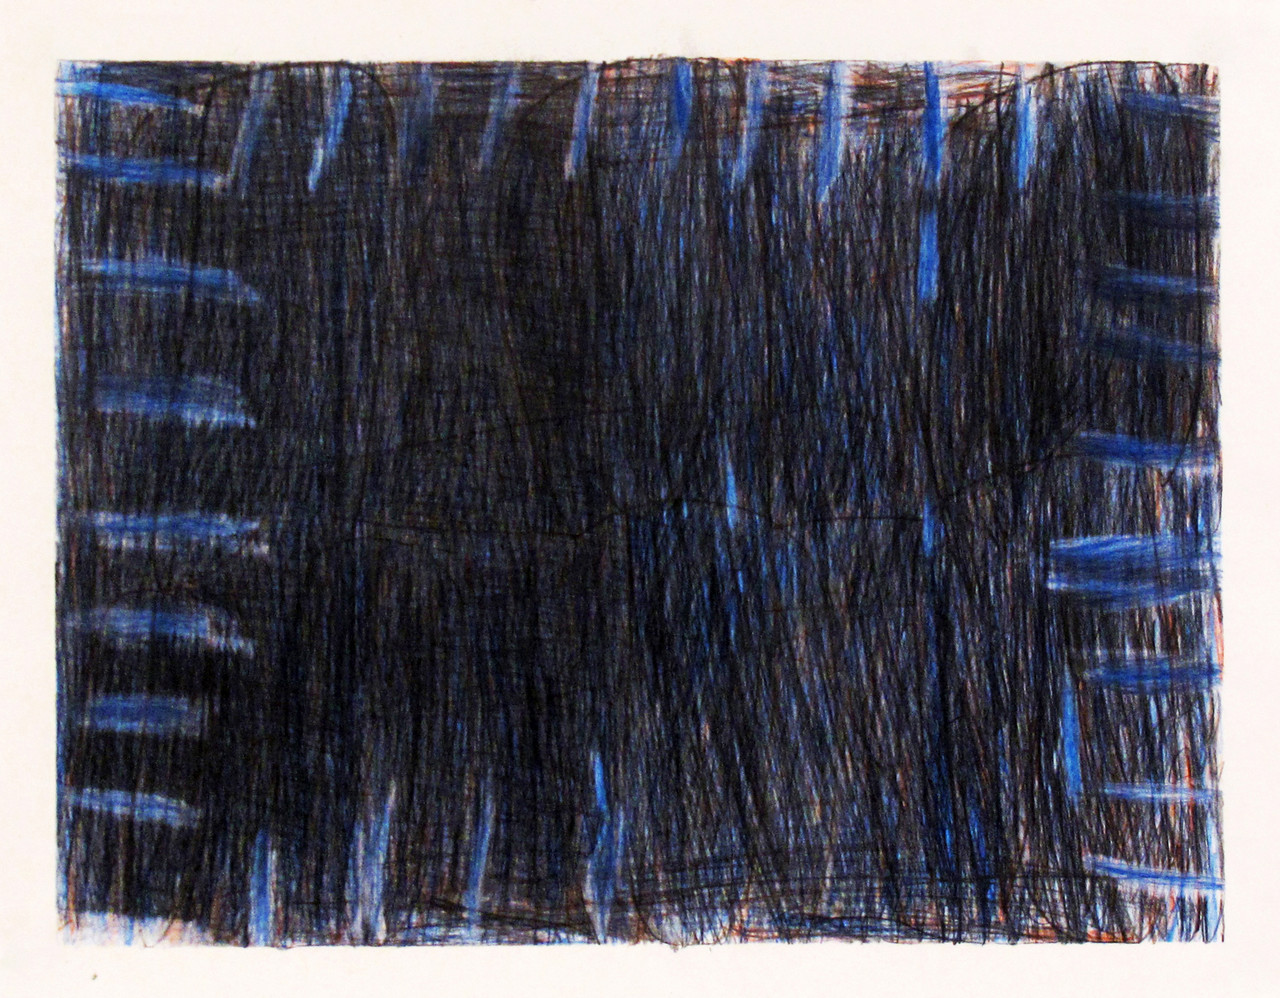 Untitled, 1988, Colored pencil and graphite on paper, 38.7 x 47 cm, BS 028